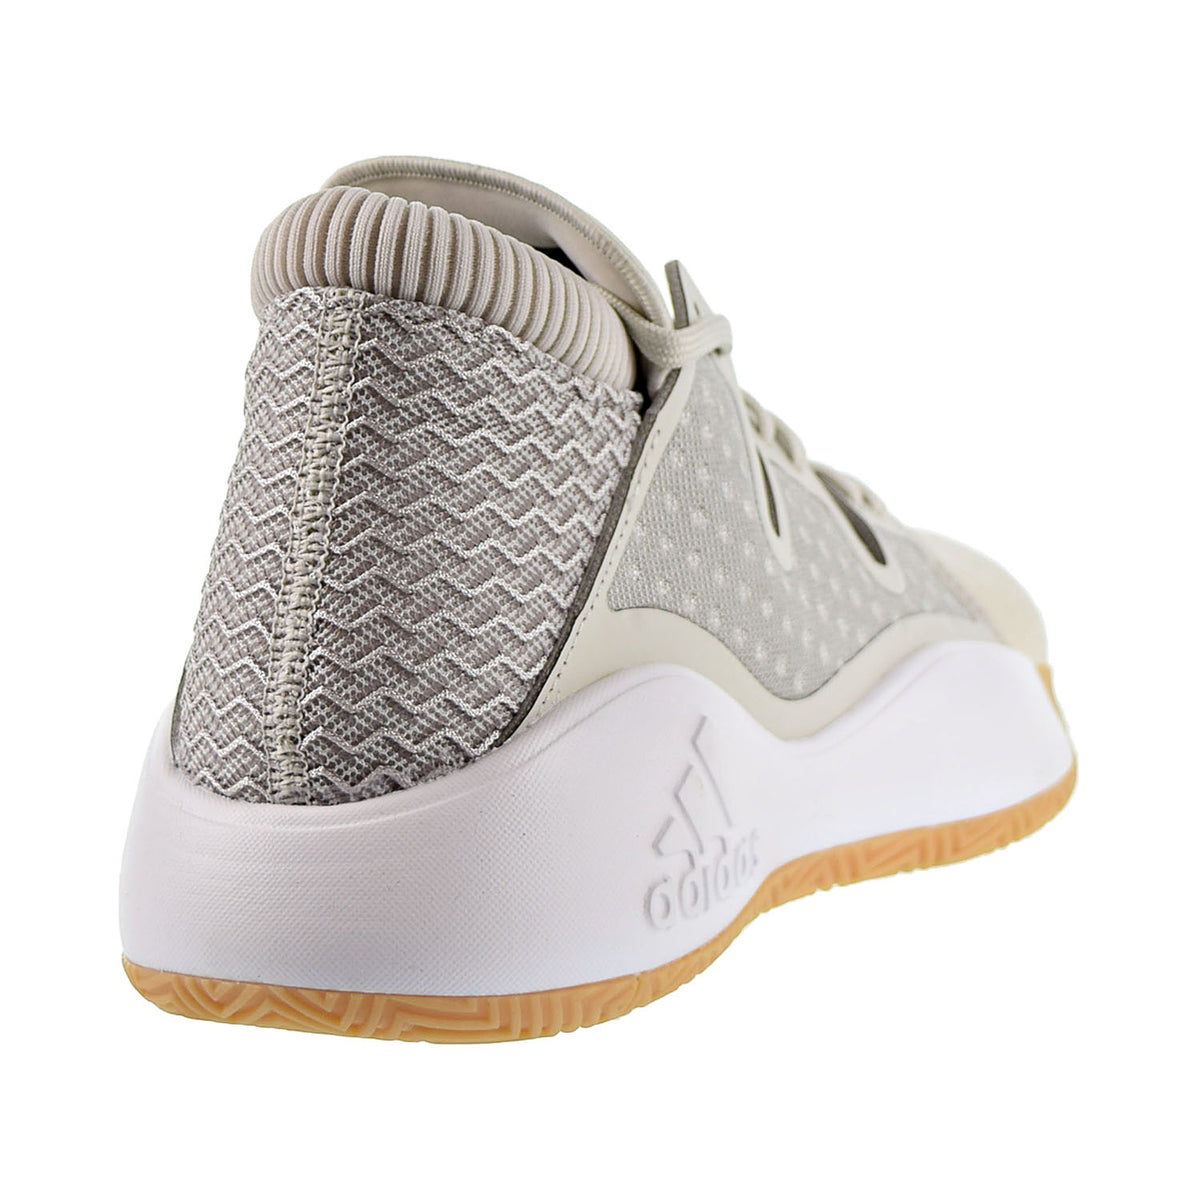 Agua con gas Arquitectura El extraño Adidas Pro Vision Men's Basketball Shoes Shoes Raw White/Light Brown